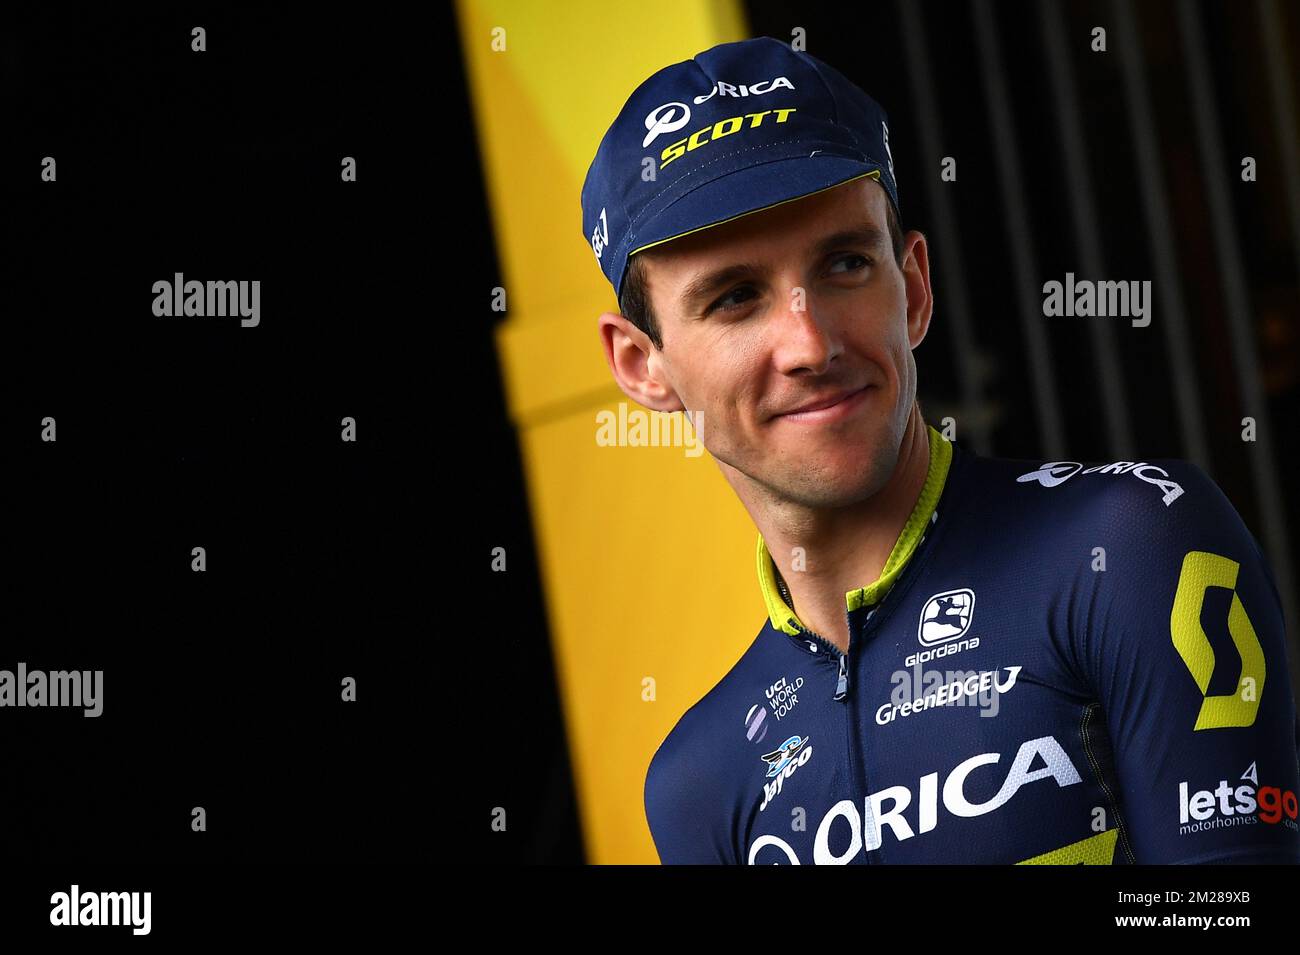 Great Britain Simon Yates of Orica - Scott celebrates on the podium after the 11th stage of the 104th edition of the Tour de France cycling race, 203,5km from Eymet to Pau, France, Wednesday 12 July 2017. This year's Tour de France takes place from July first to July 23rd. BELGA PHOTO DAVID STOCKMAN Stock Photo